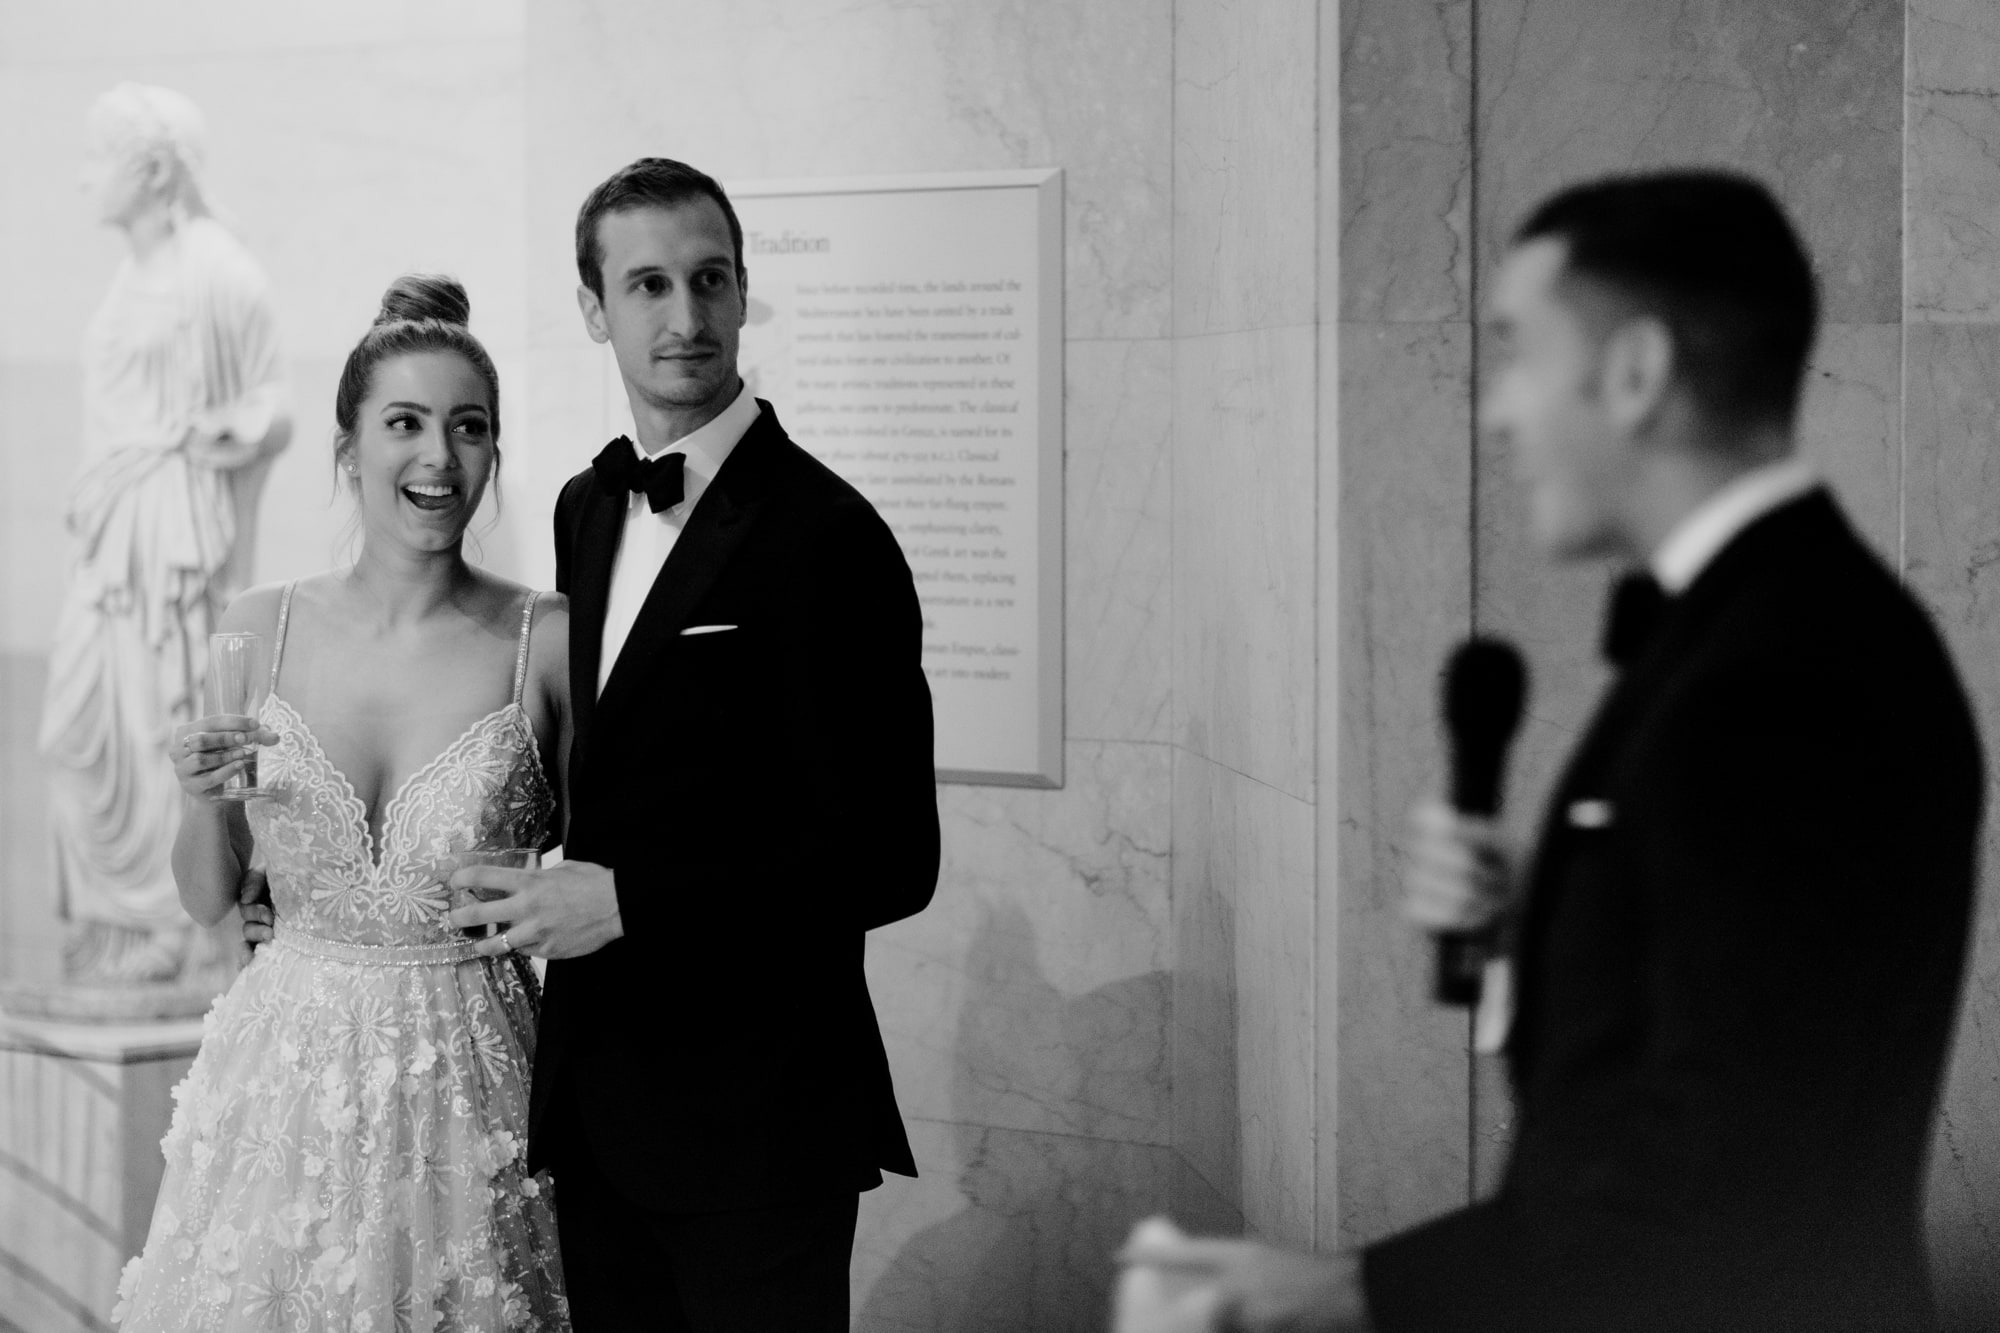 A beautiful bride and happy groom stand together, smiling and listening to wedding speeches inside the Minneapolis Institute of Art.